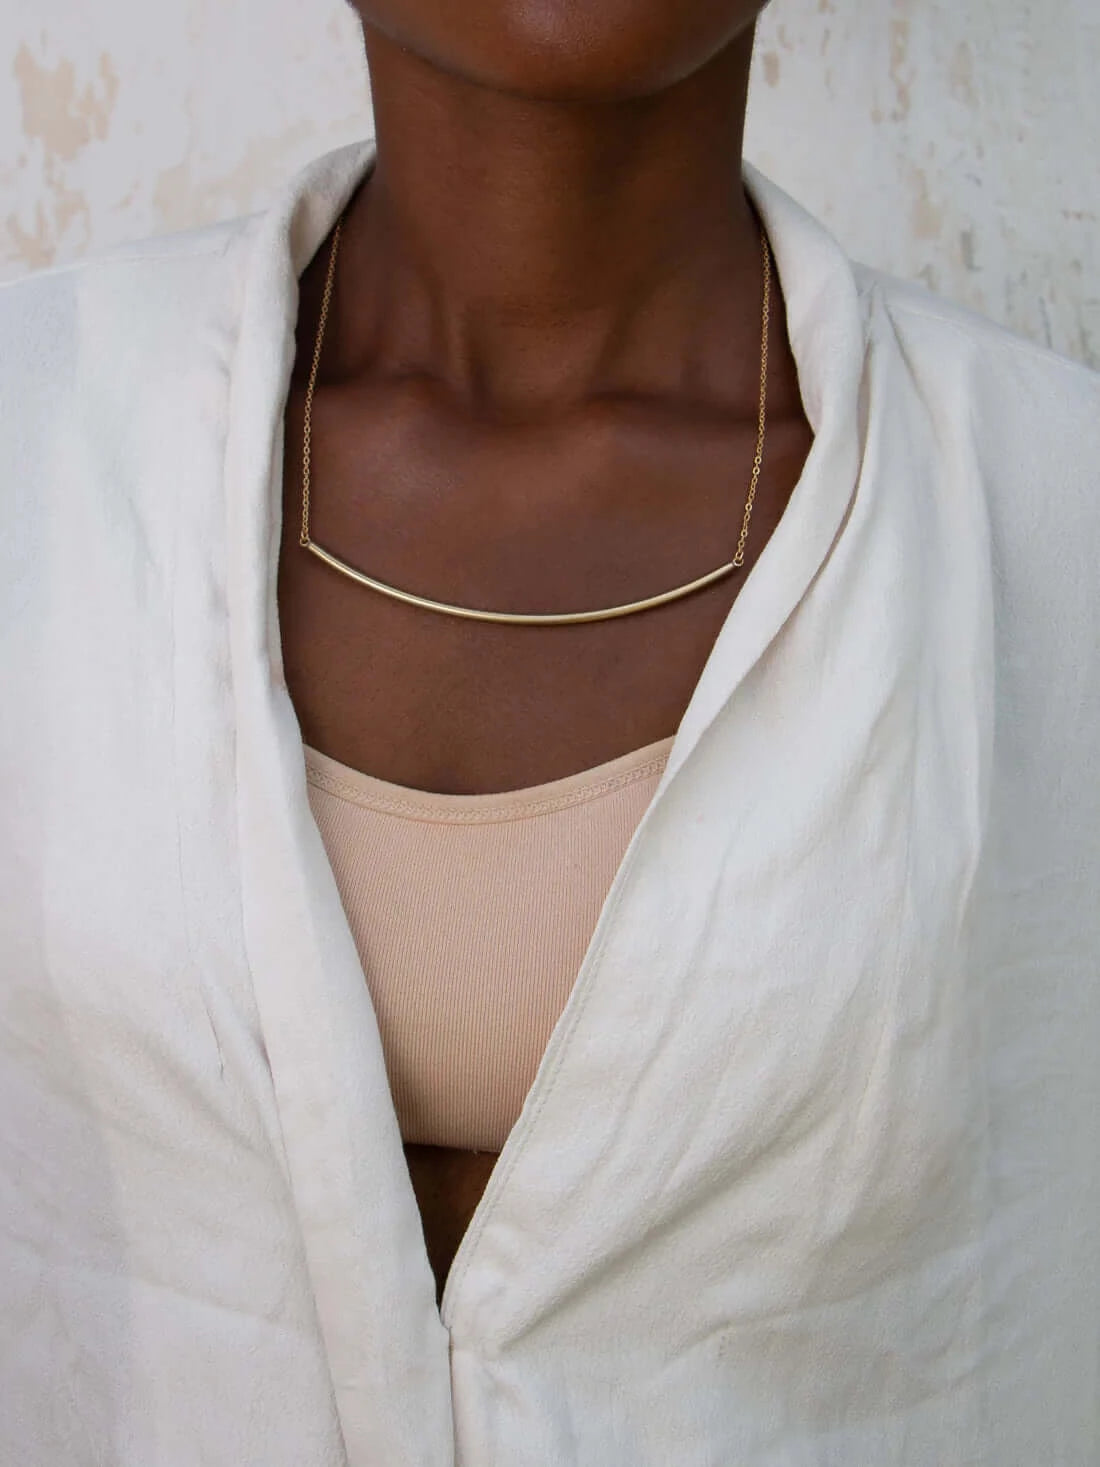 Sitima Brass Necklace on model with white shirt